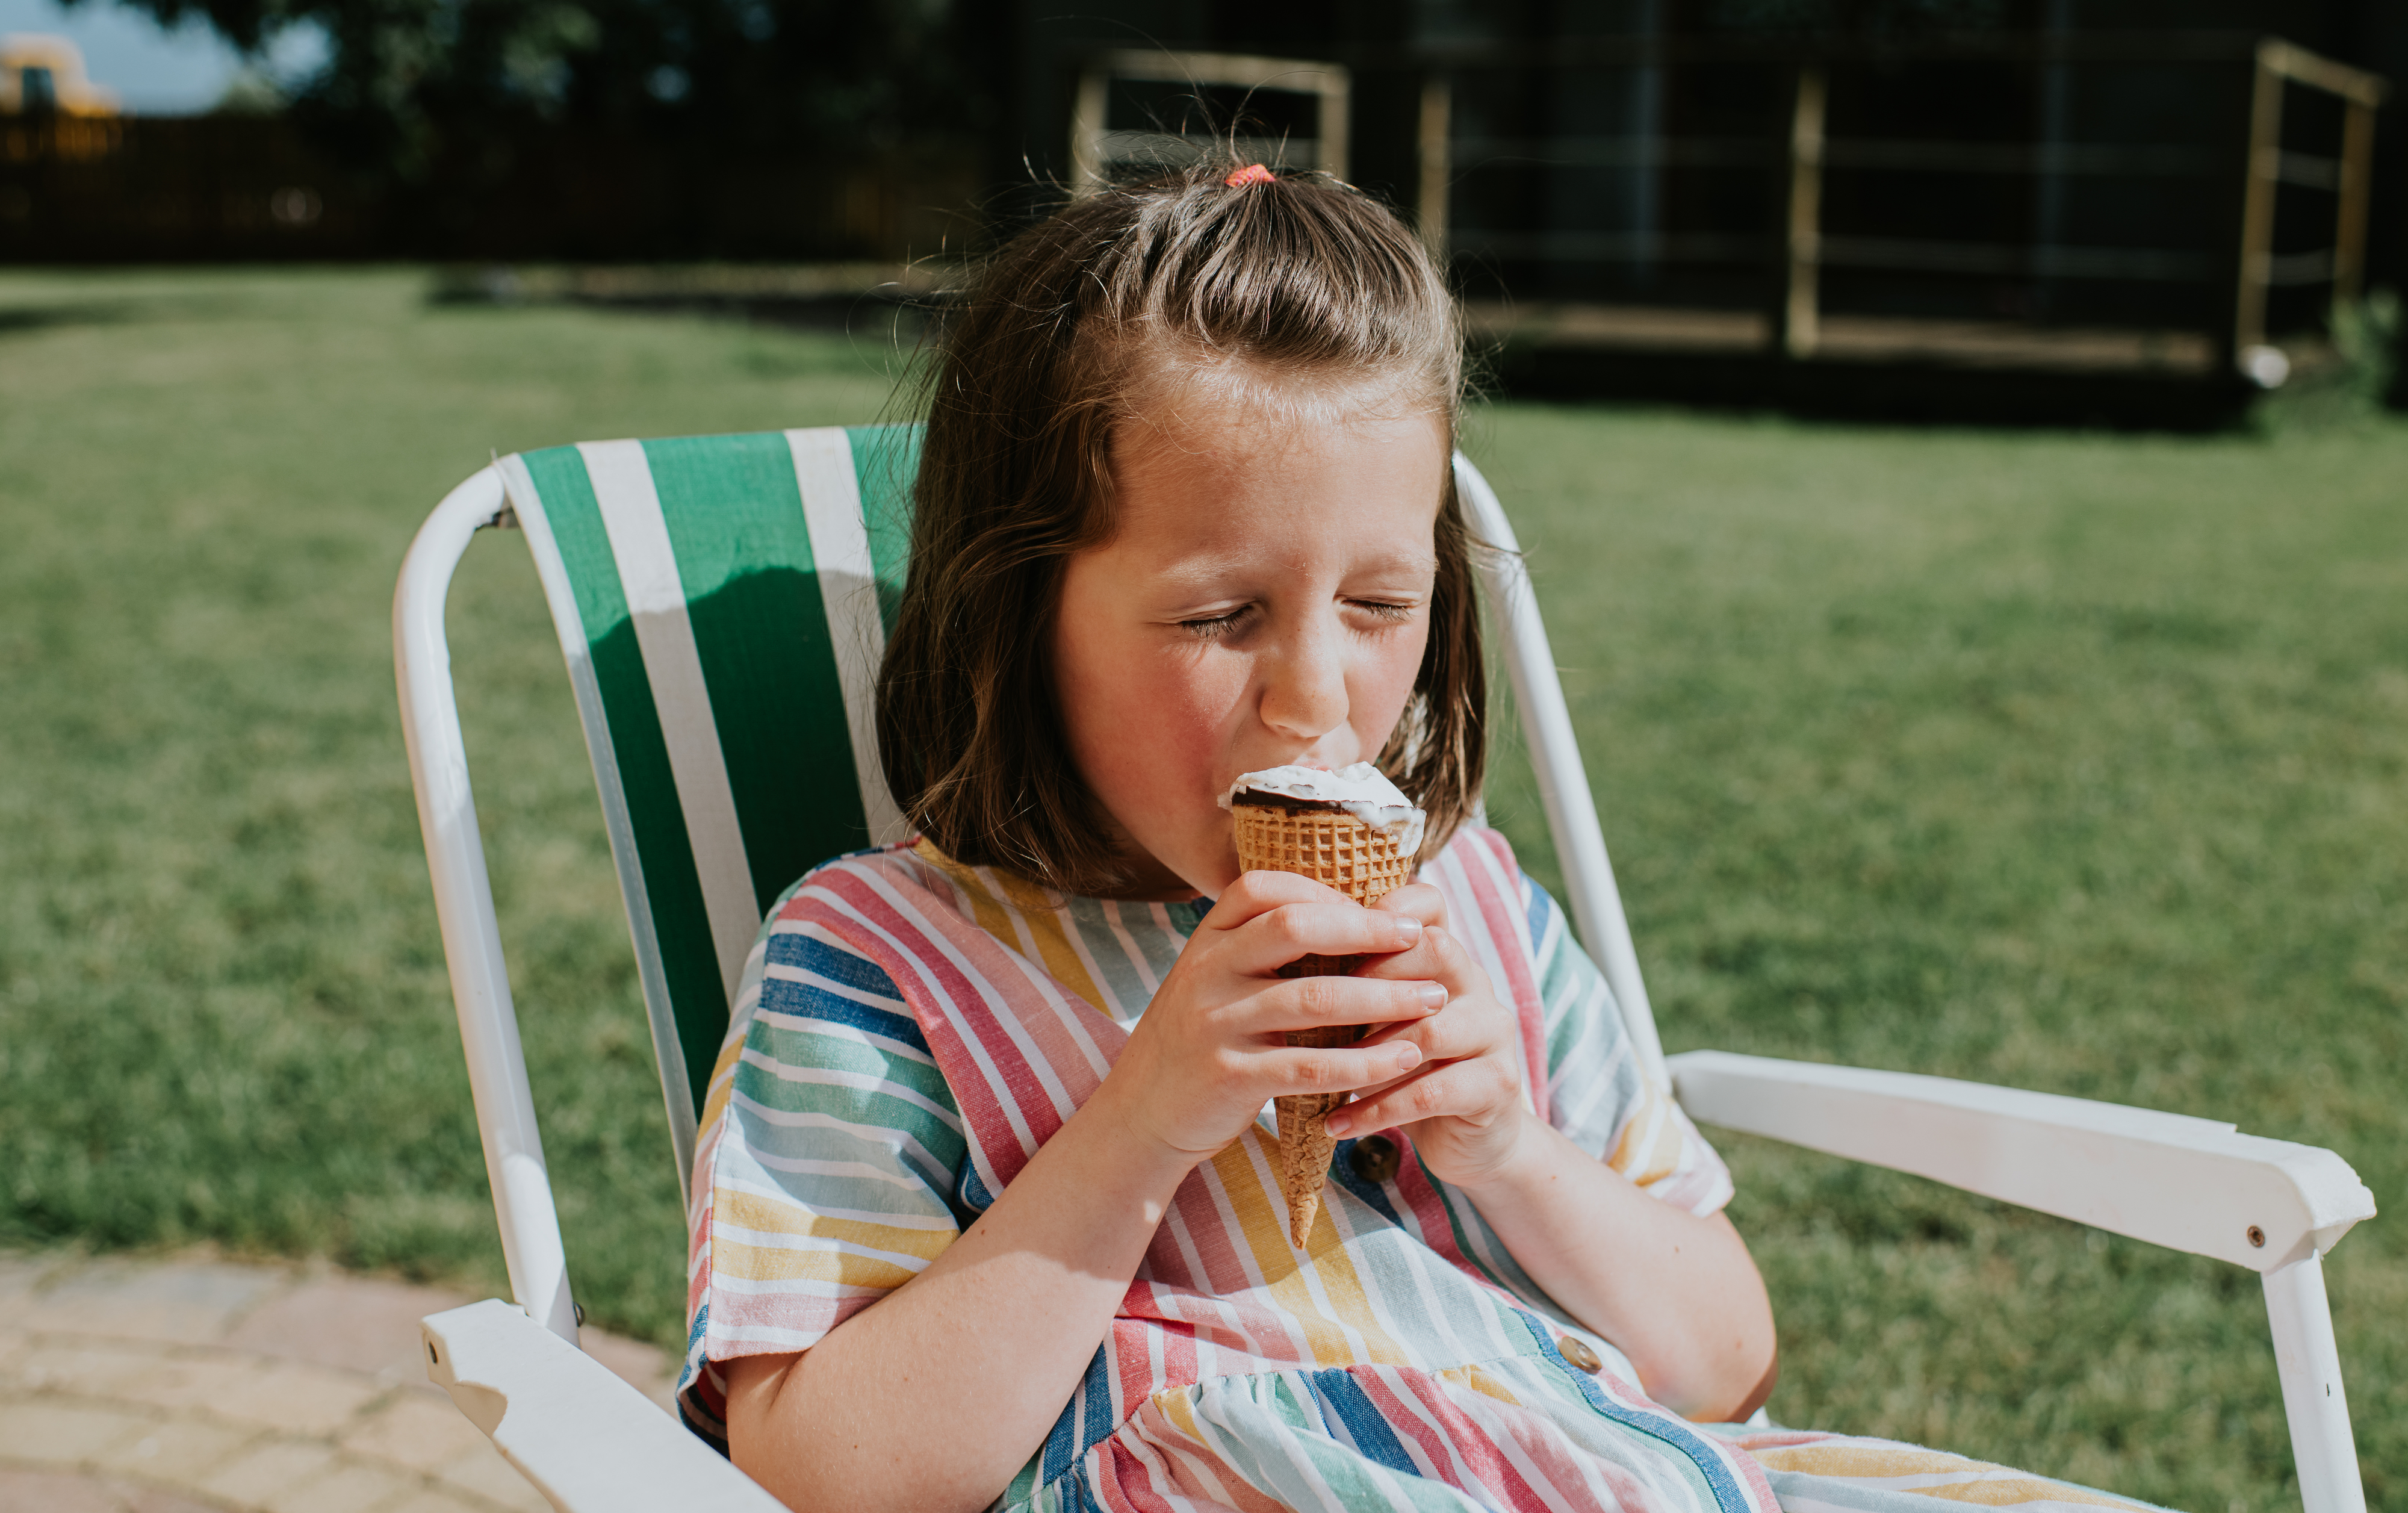 Child sitting on a chair outdoors enjoying an ice cream cone